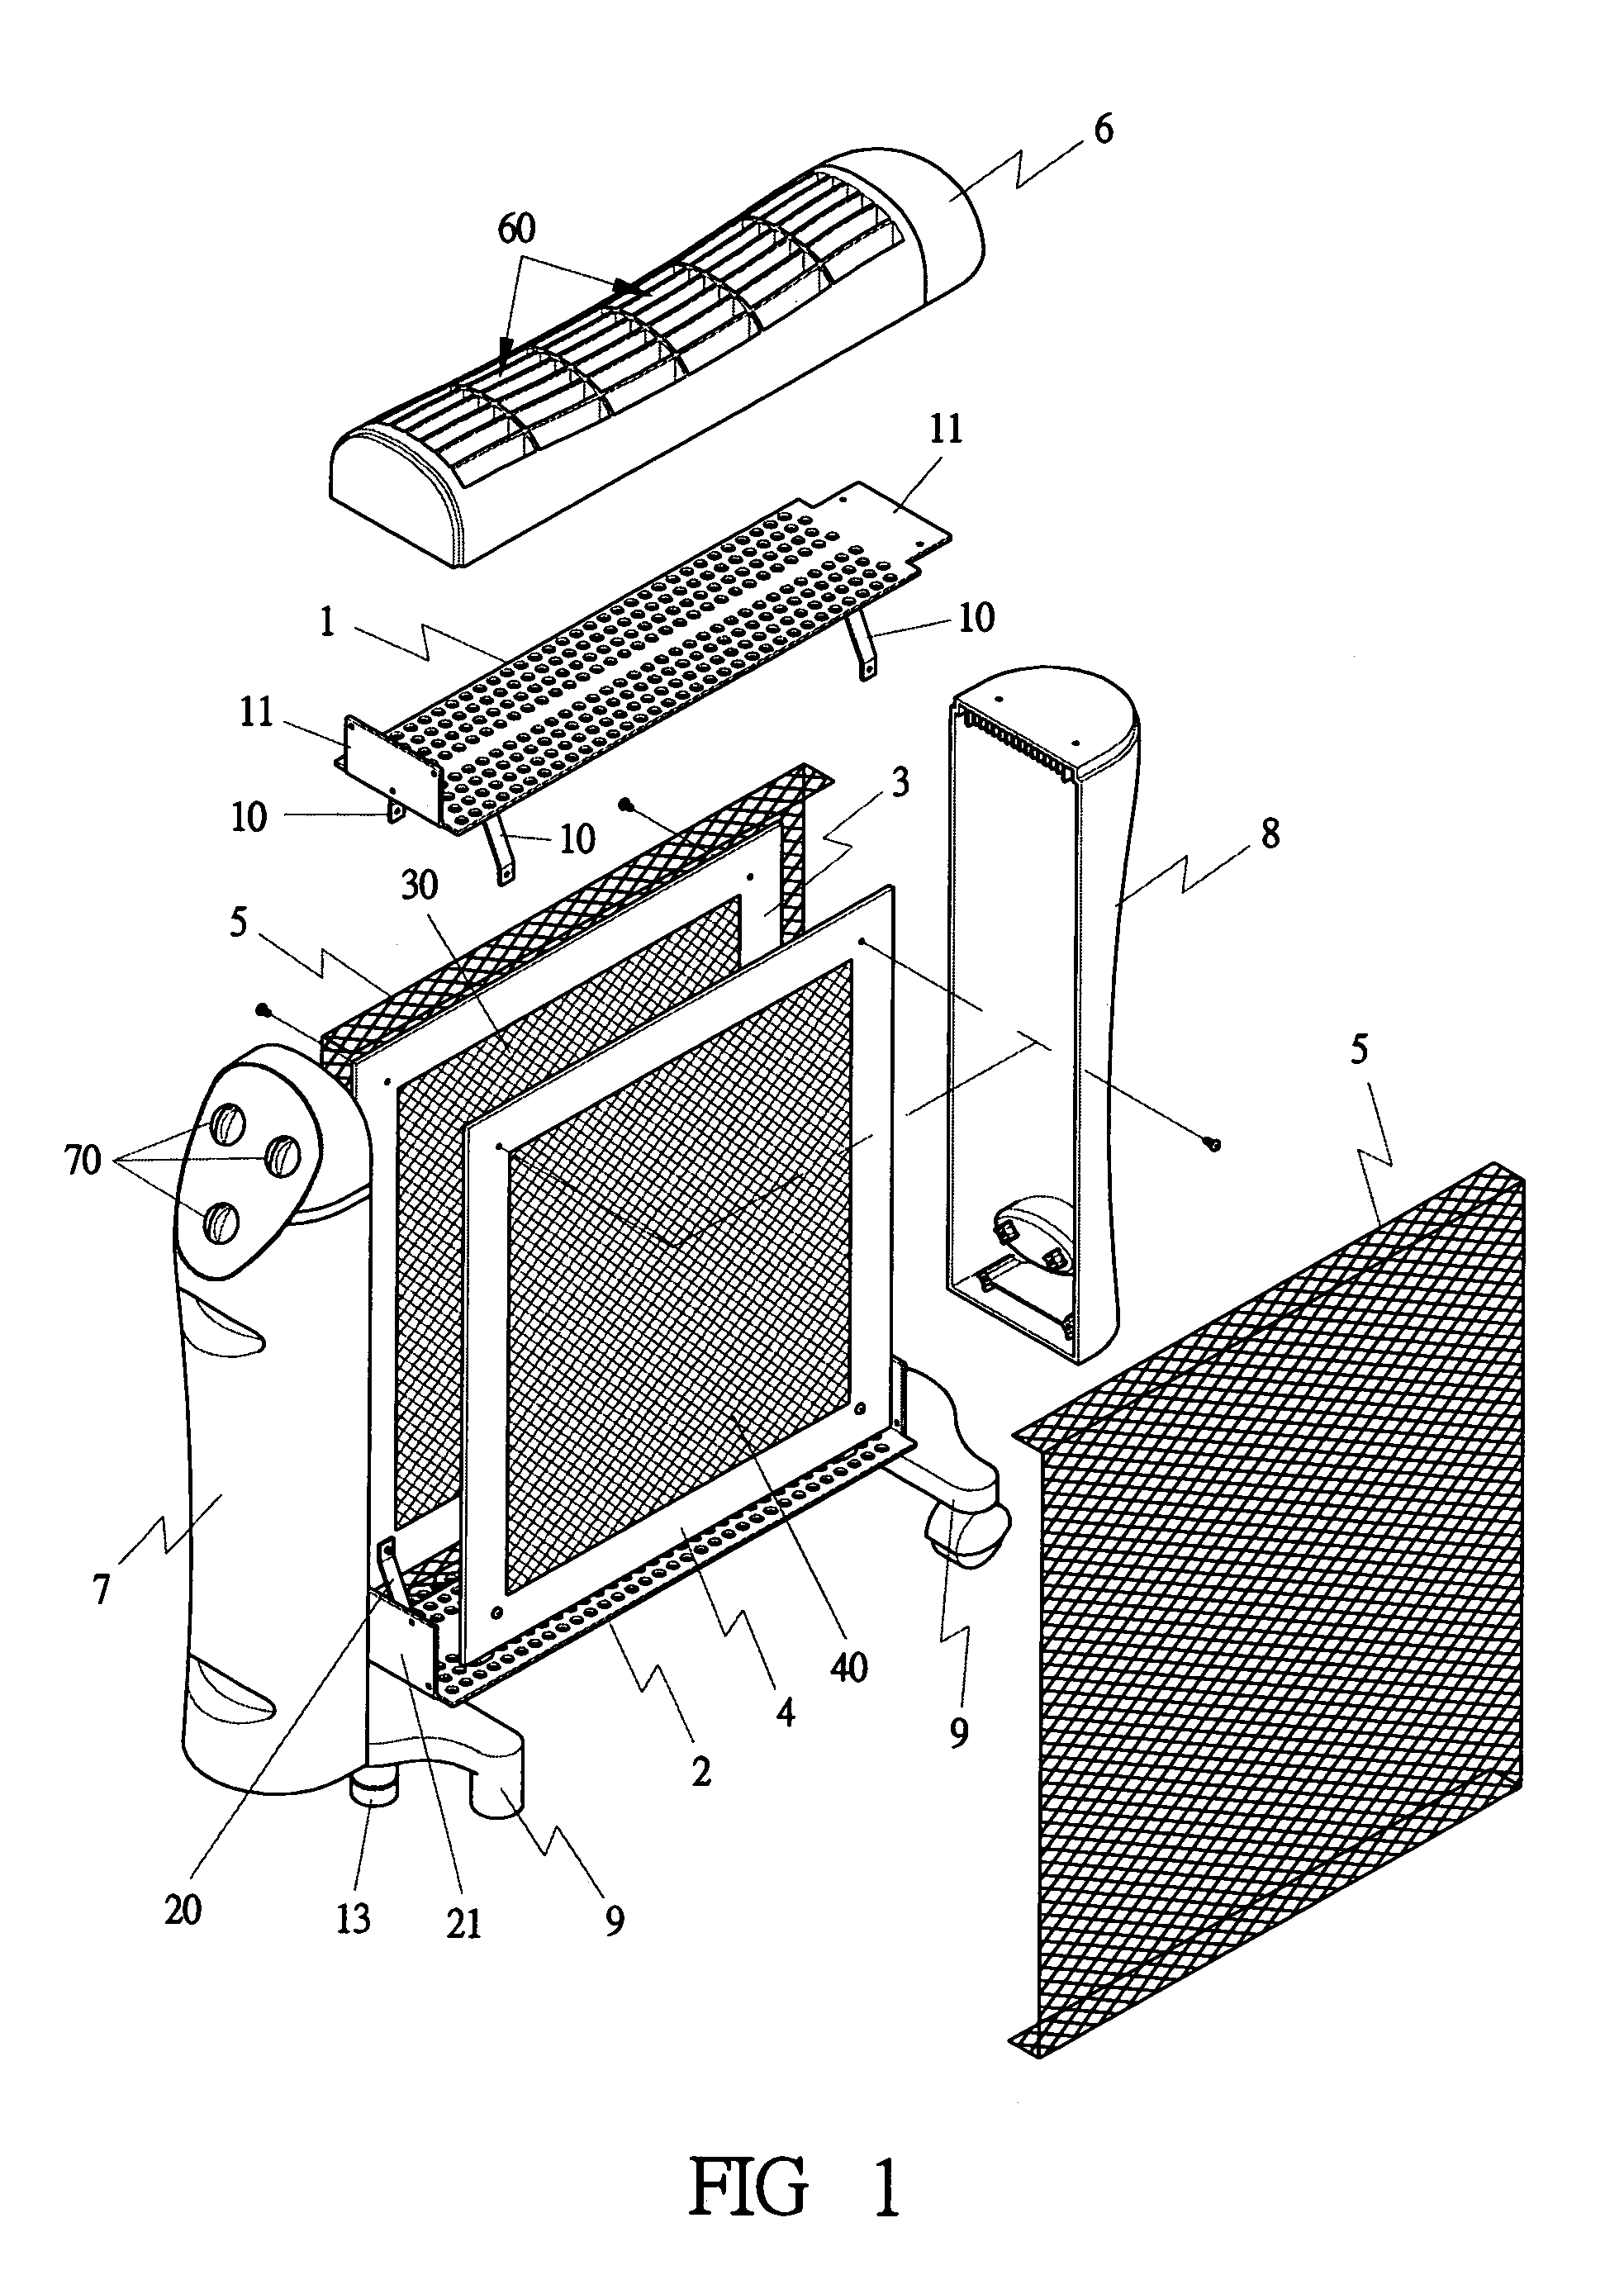 Convectional radial electric warmer